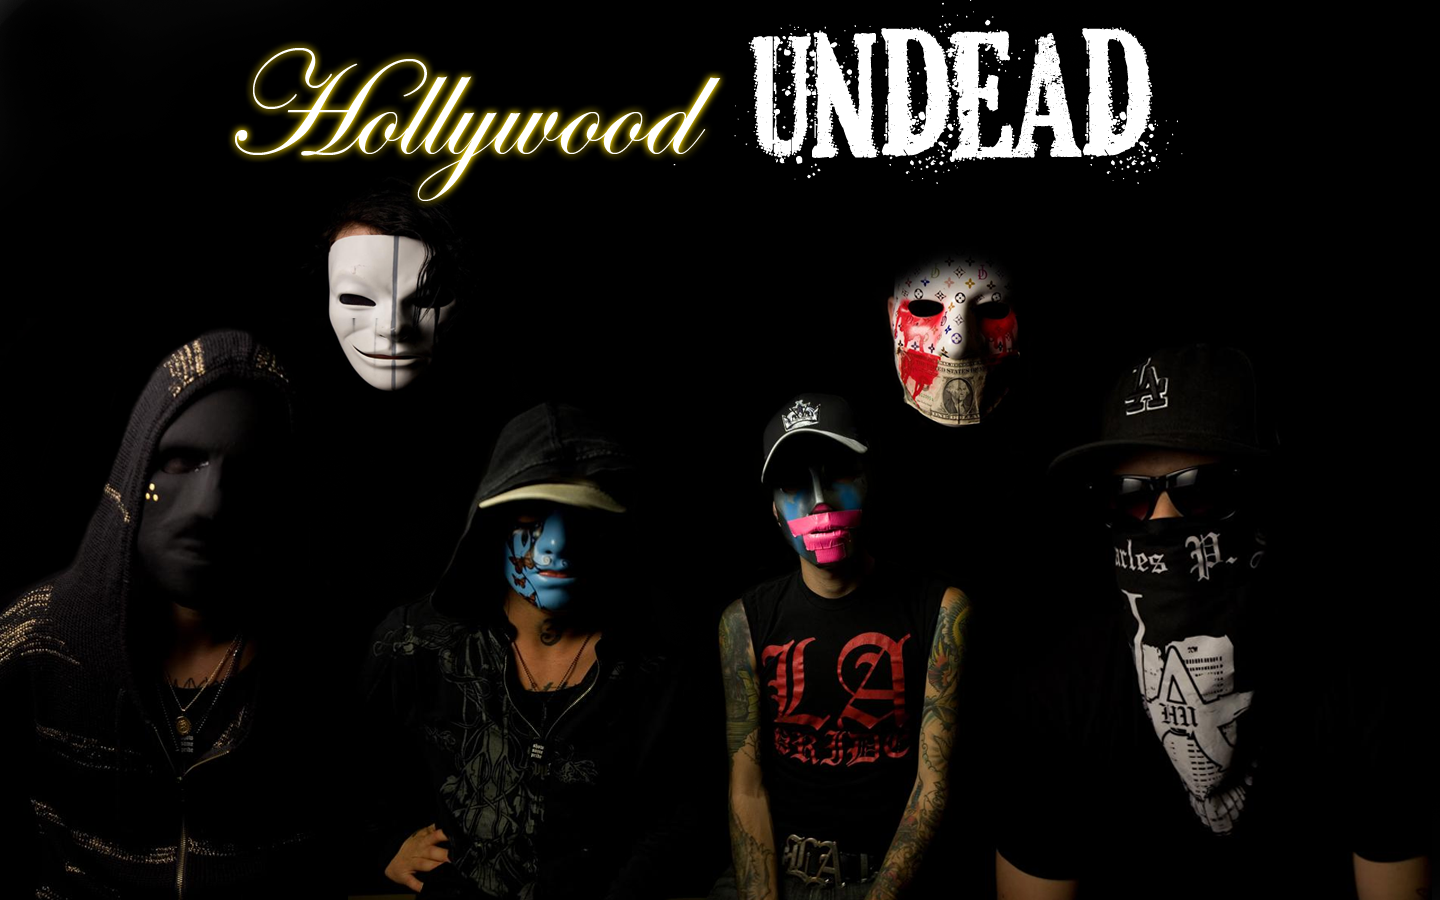 Hollywood Undead Wallpapers Hd - Hollywood Undead , HD Wallpaper & Backgrounds